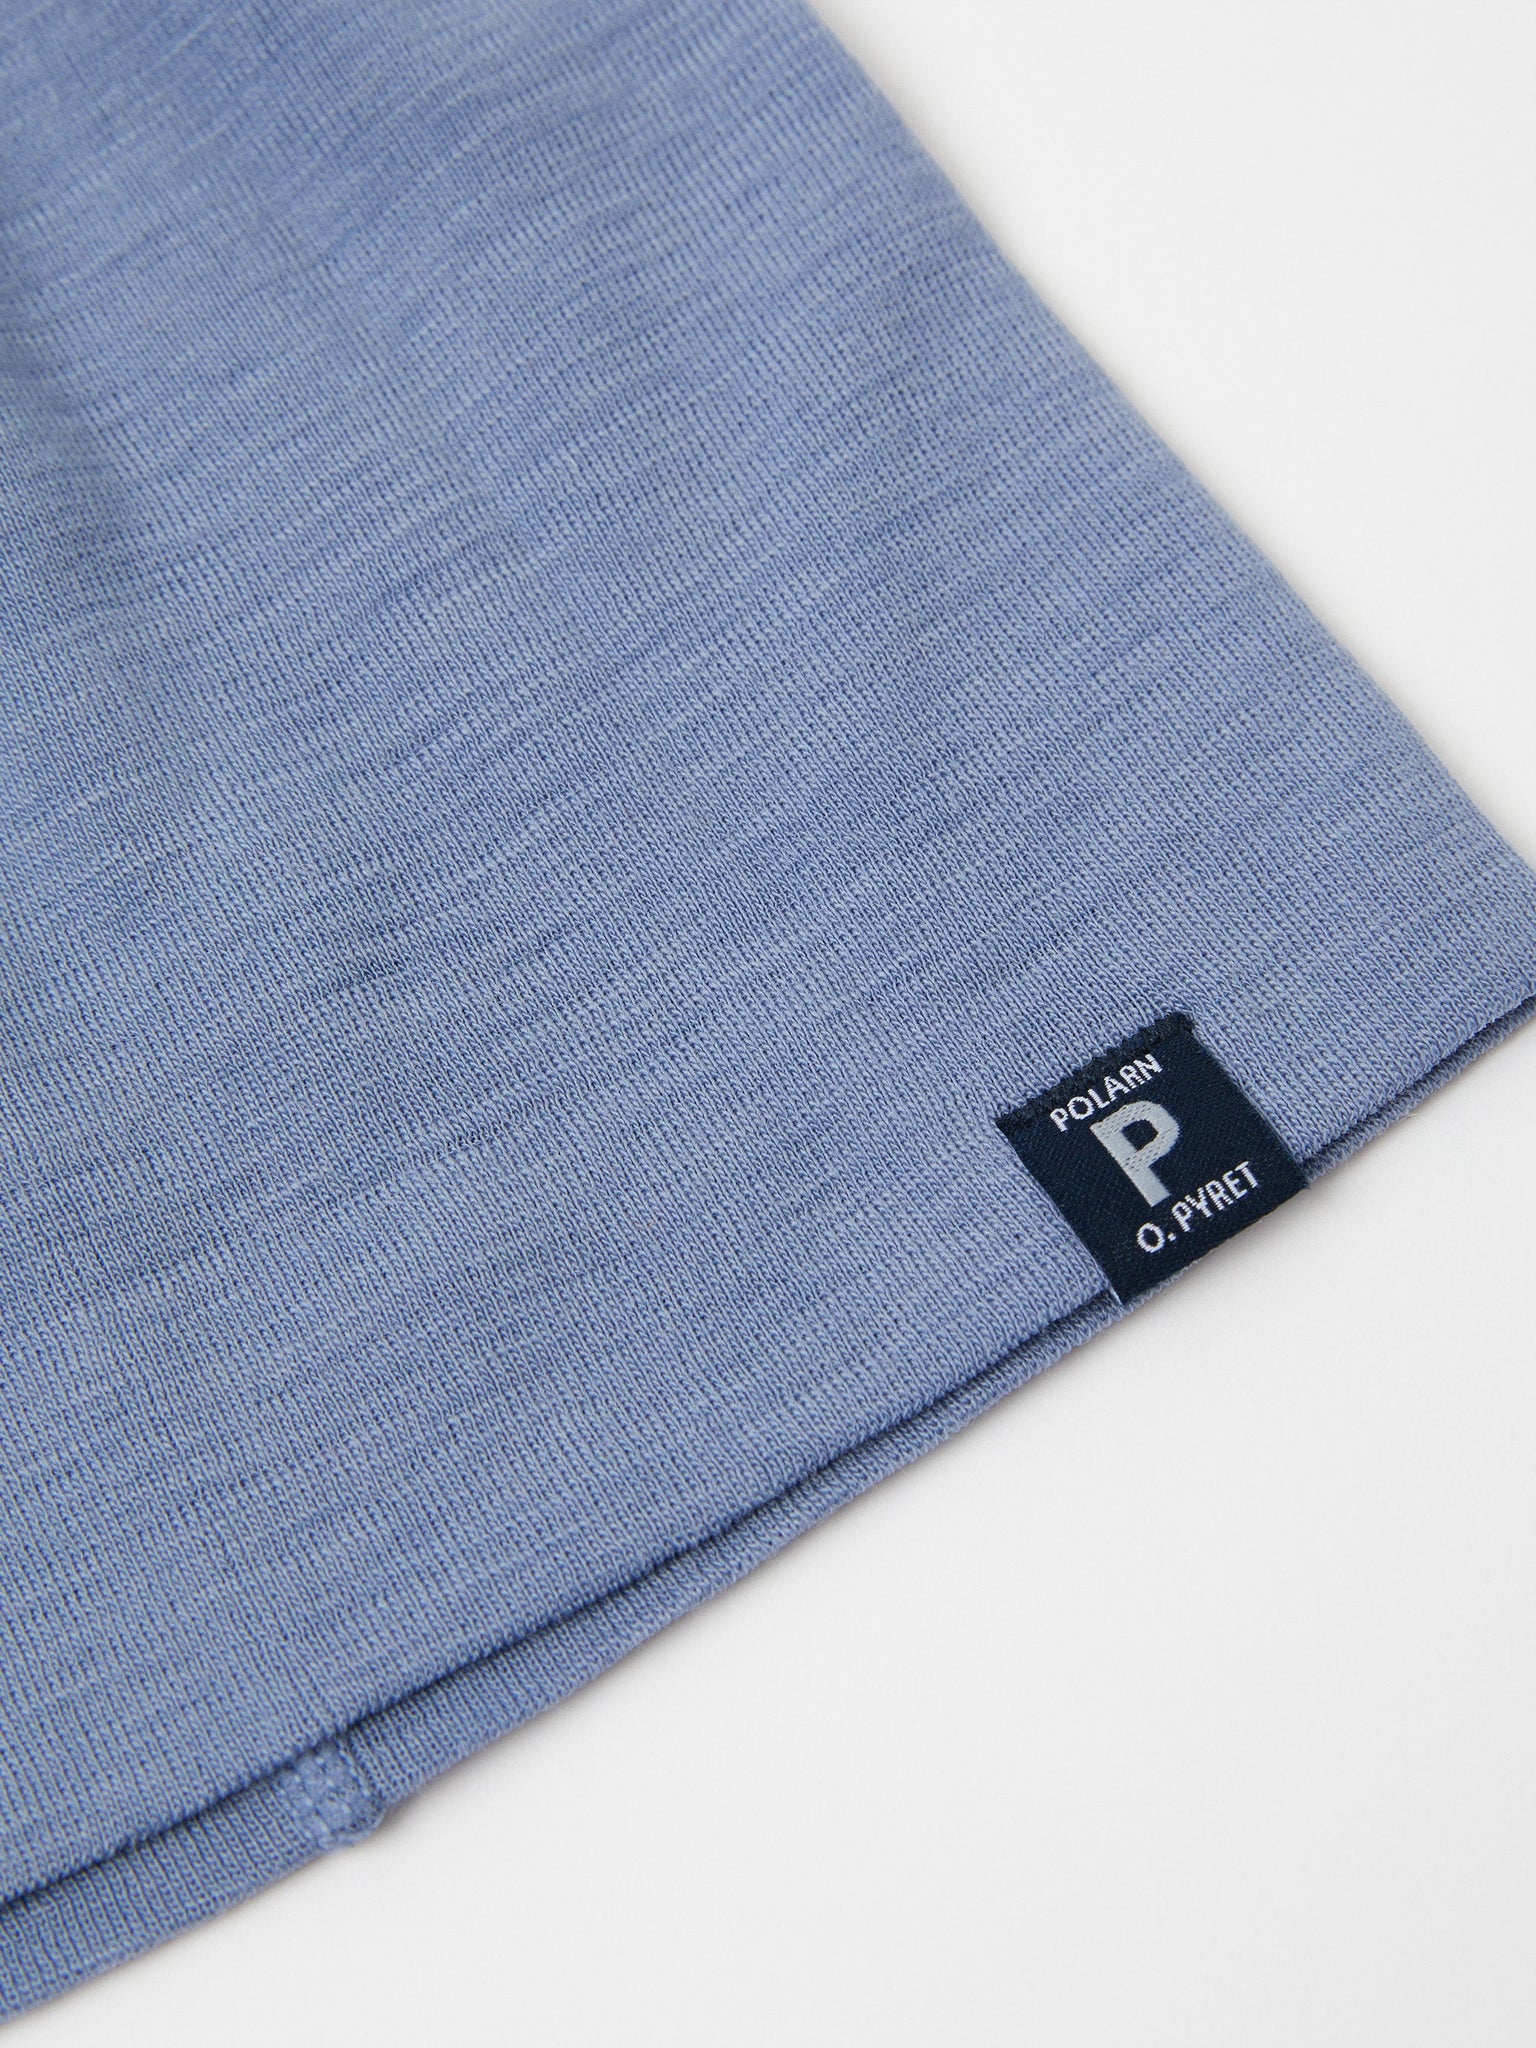 Merino Wool Blue Kids Beanie Hat from the Polarn O. Pyret outerwear collection. Made using ethically sourced materials.